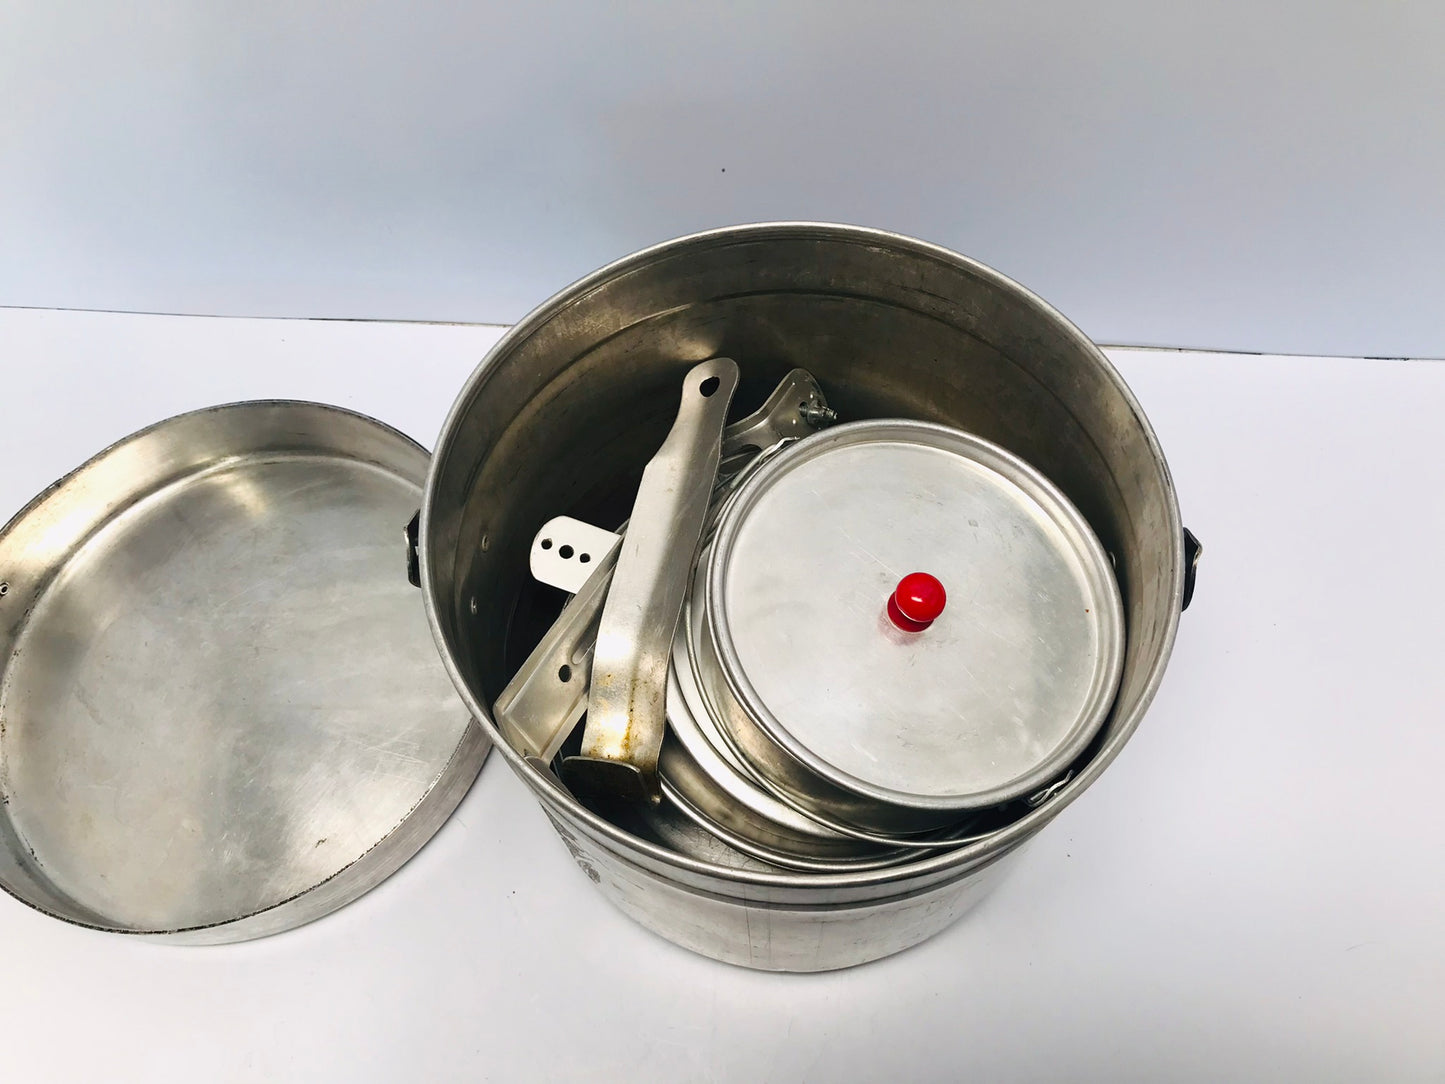 Camping Fishing Heavy Aluminum Camp Pots Dishes All In One Set